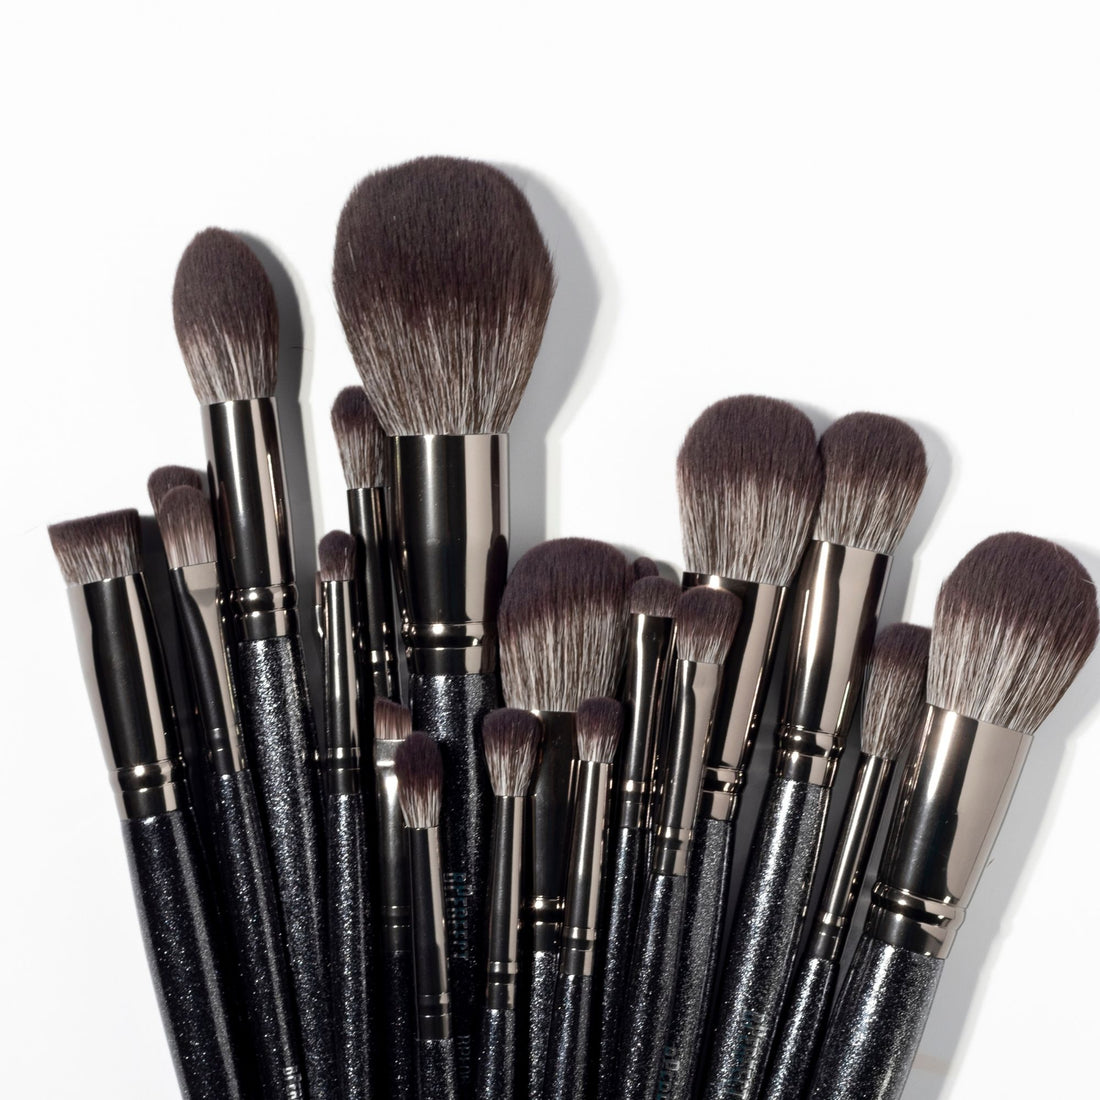 bPerfect Ultimate Brush Collection, close up